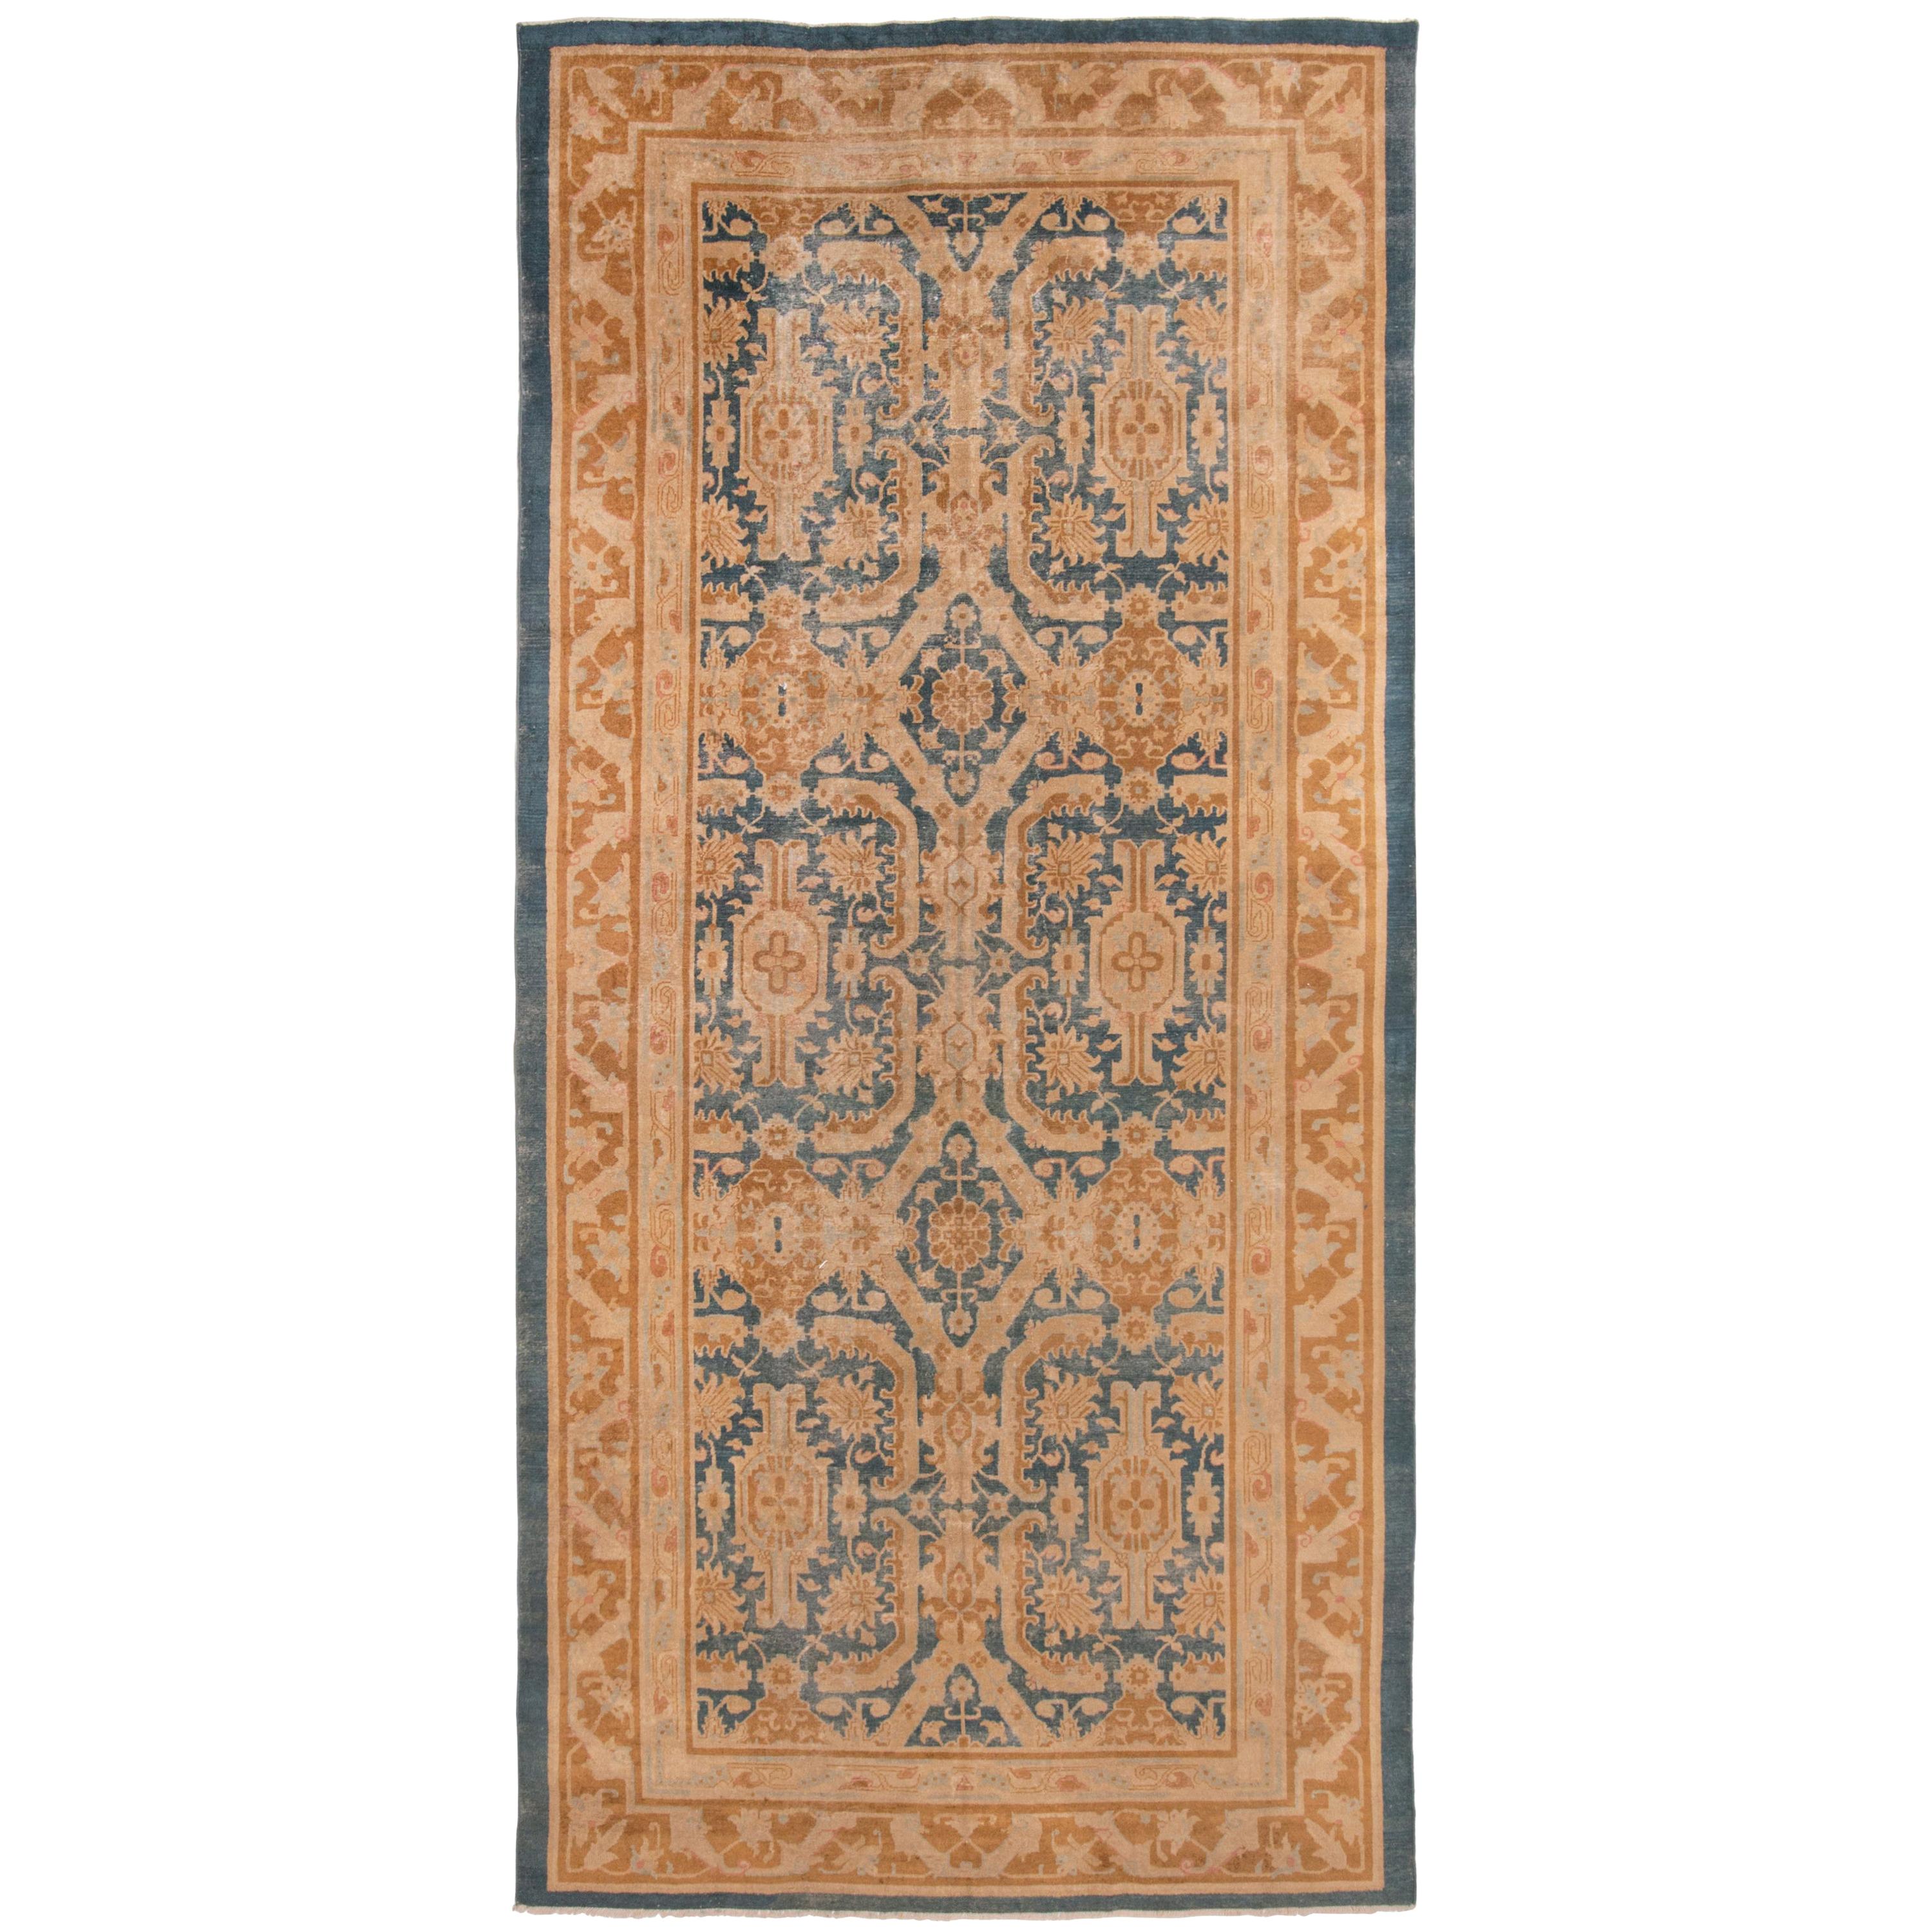 Antique Mahal Blue Indian Wool Rug with All-Over Floral Pattern by Rug & Kilim